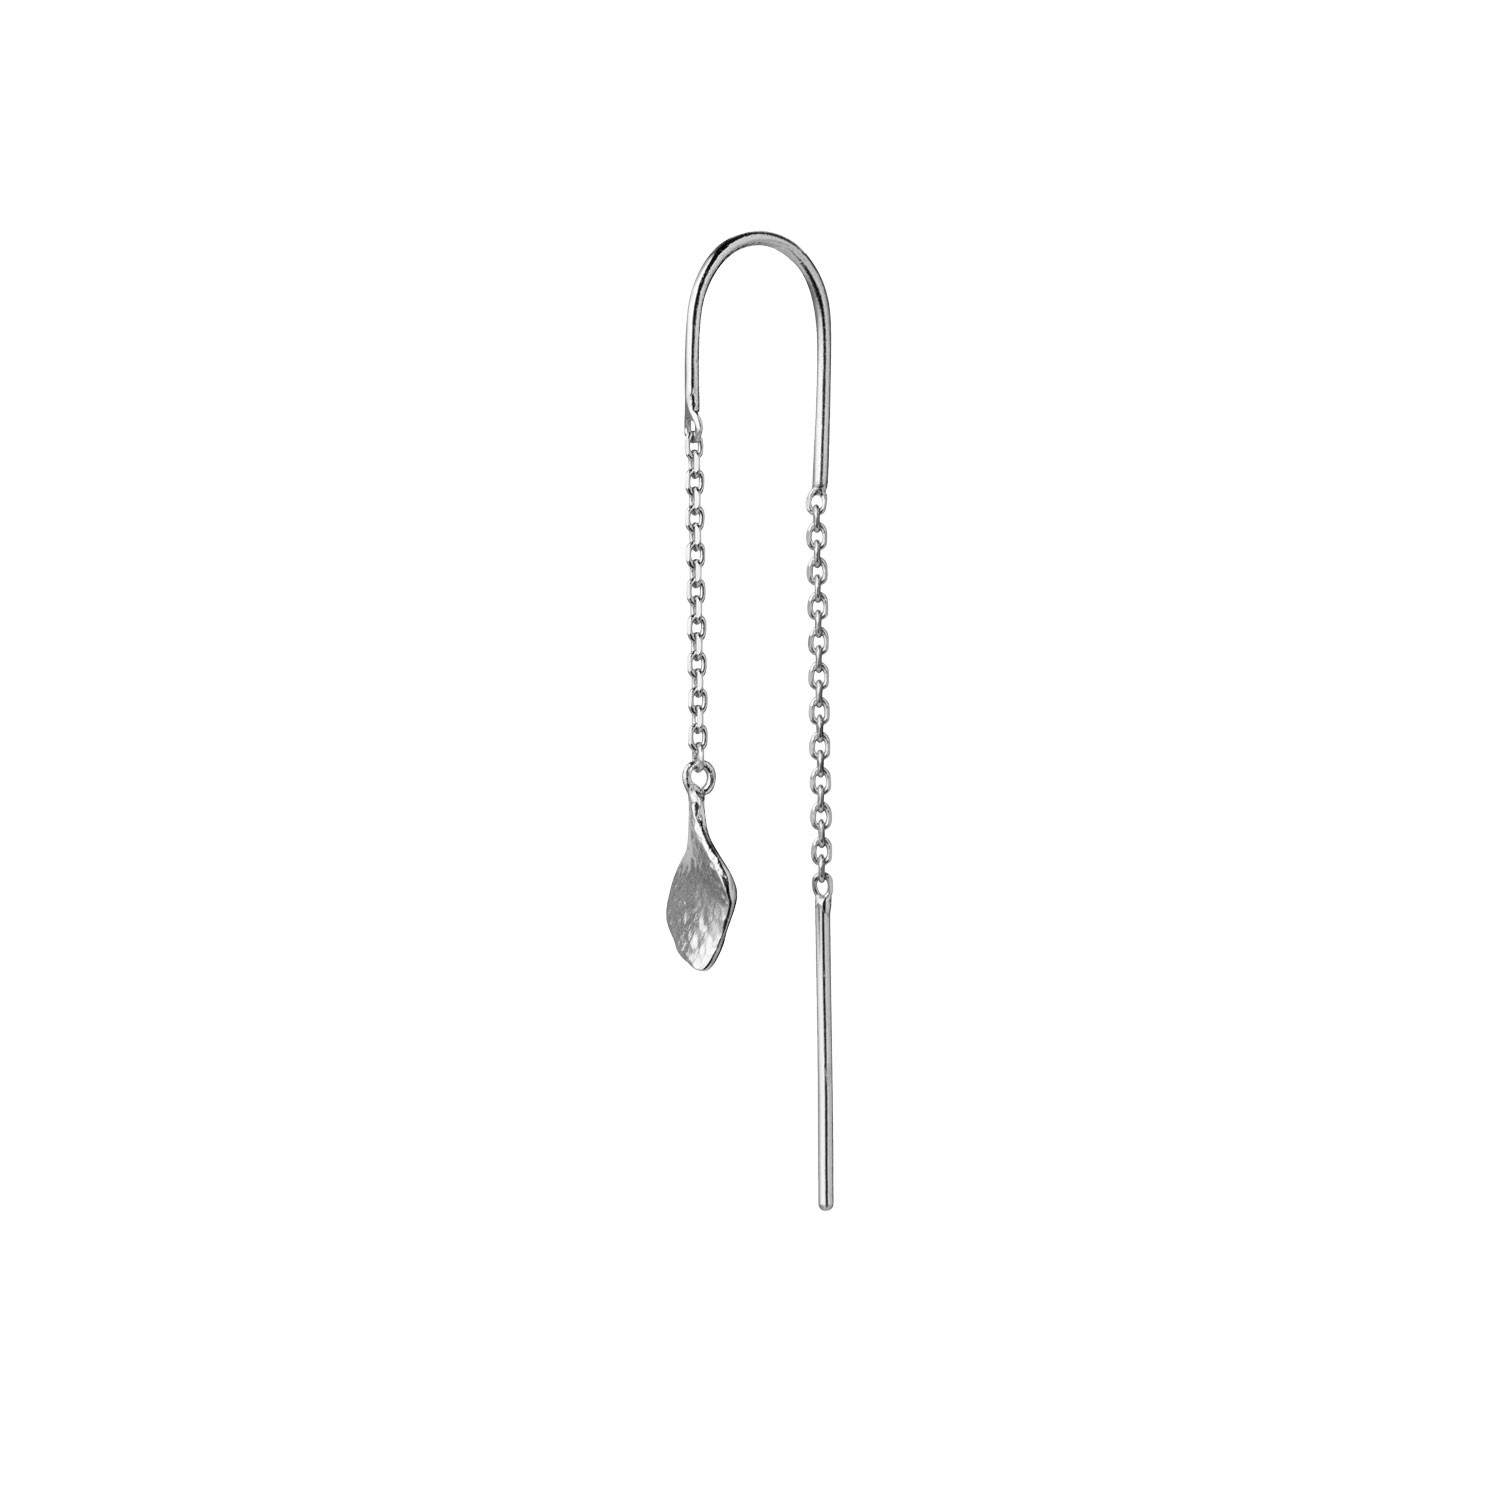 Petit Ile De L'Amour Double Chain Earring von STINE A Jewelry in Silber Sterling 925